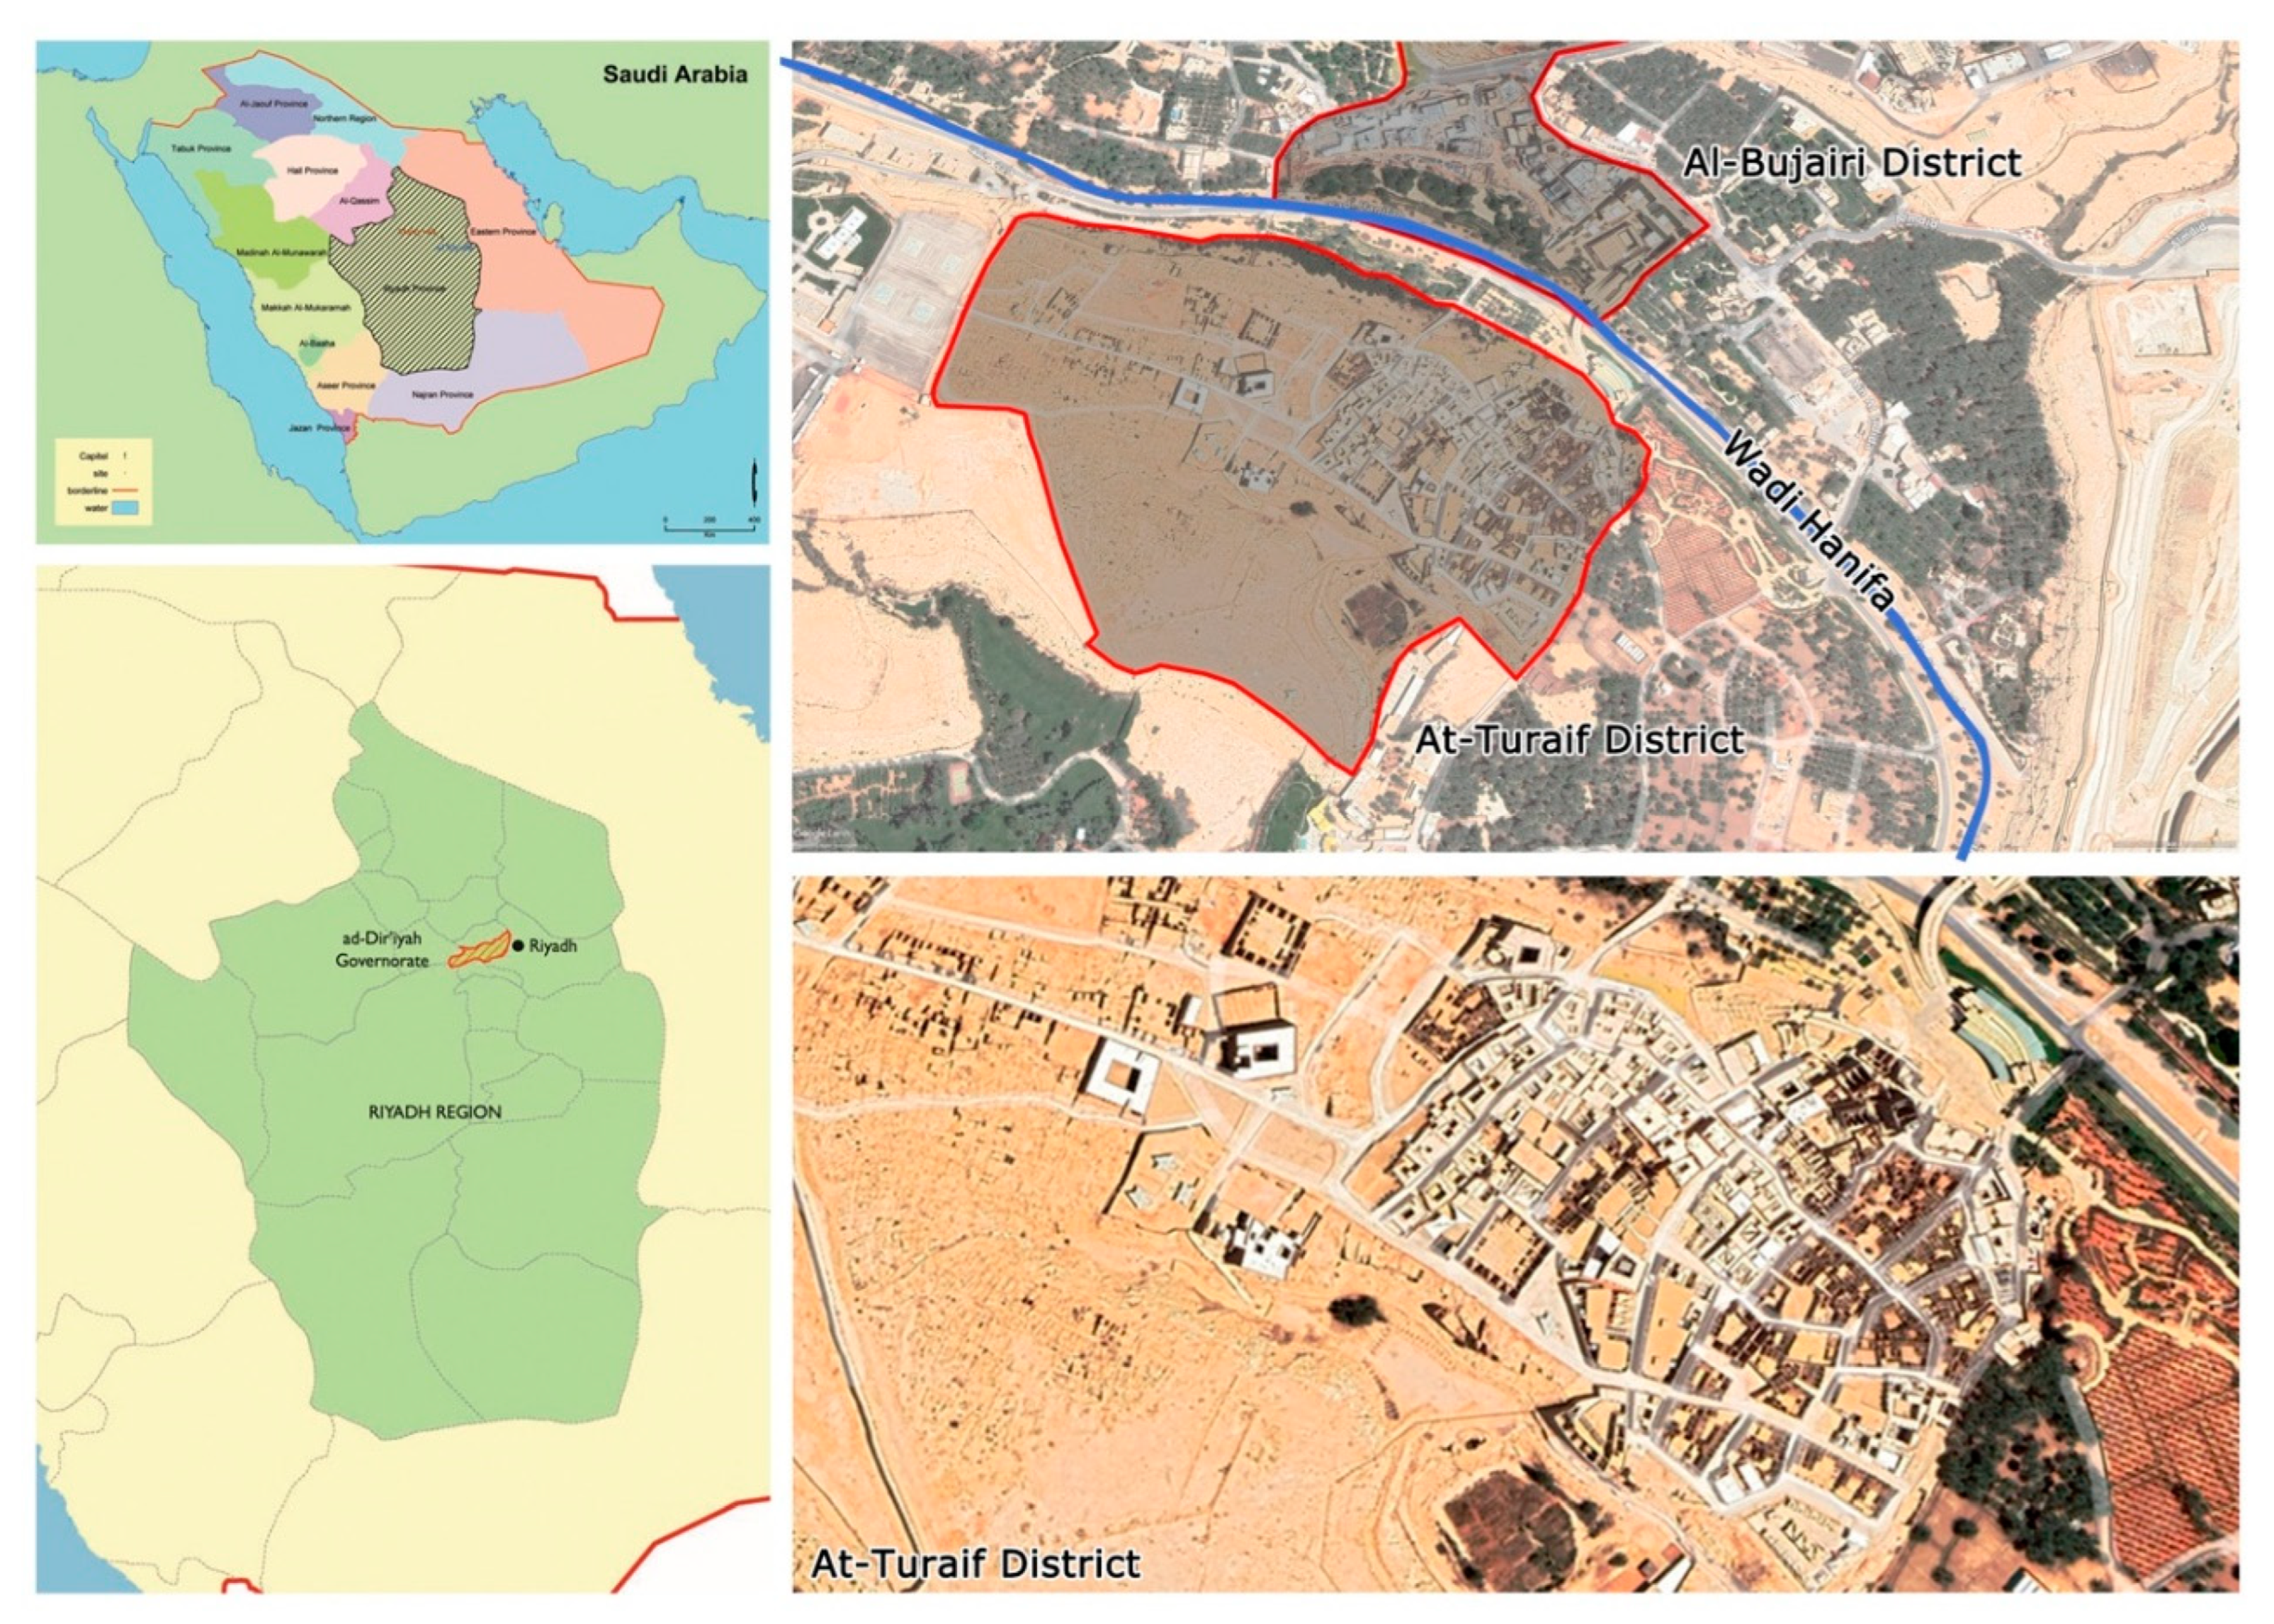 PDF) The Heritage Jewel of Saudi Arabia: A Descriptive Analysis of the  Heritage Management and Development Activities in the At-Turaif District in  Ad-Dir'iyah, a World Heritage Site (WHS)